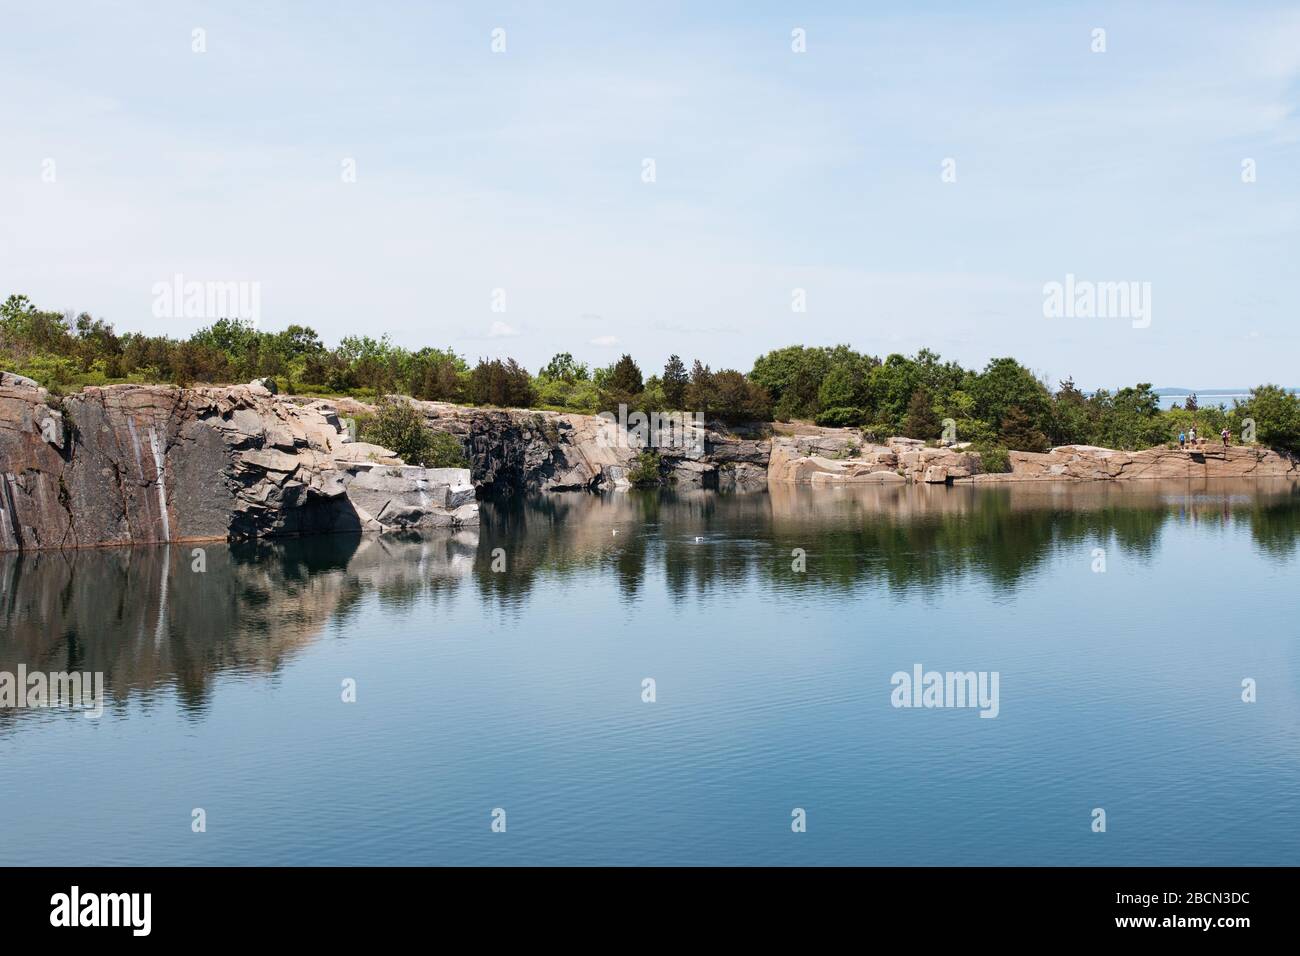 The former Babson Farm granite quarry filled with water at Halibut Point State Park in Rockport, Massachusetts, USA. Stock Photo